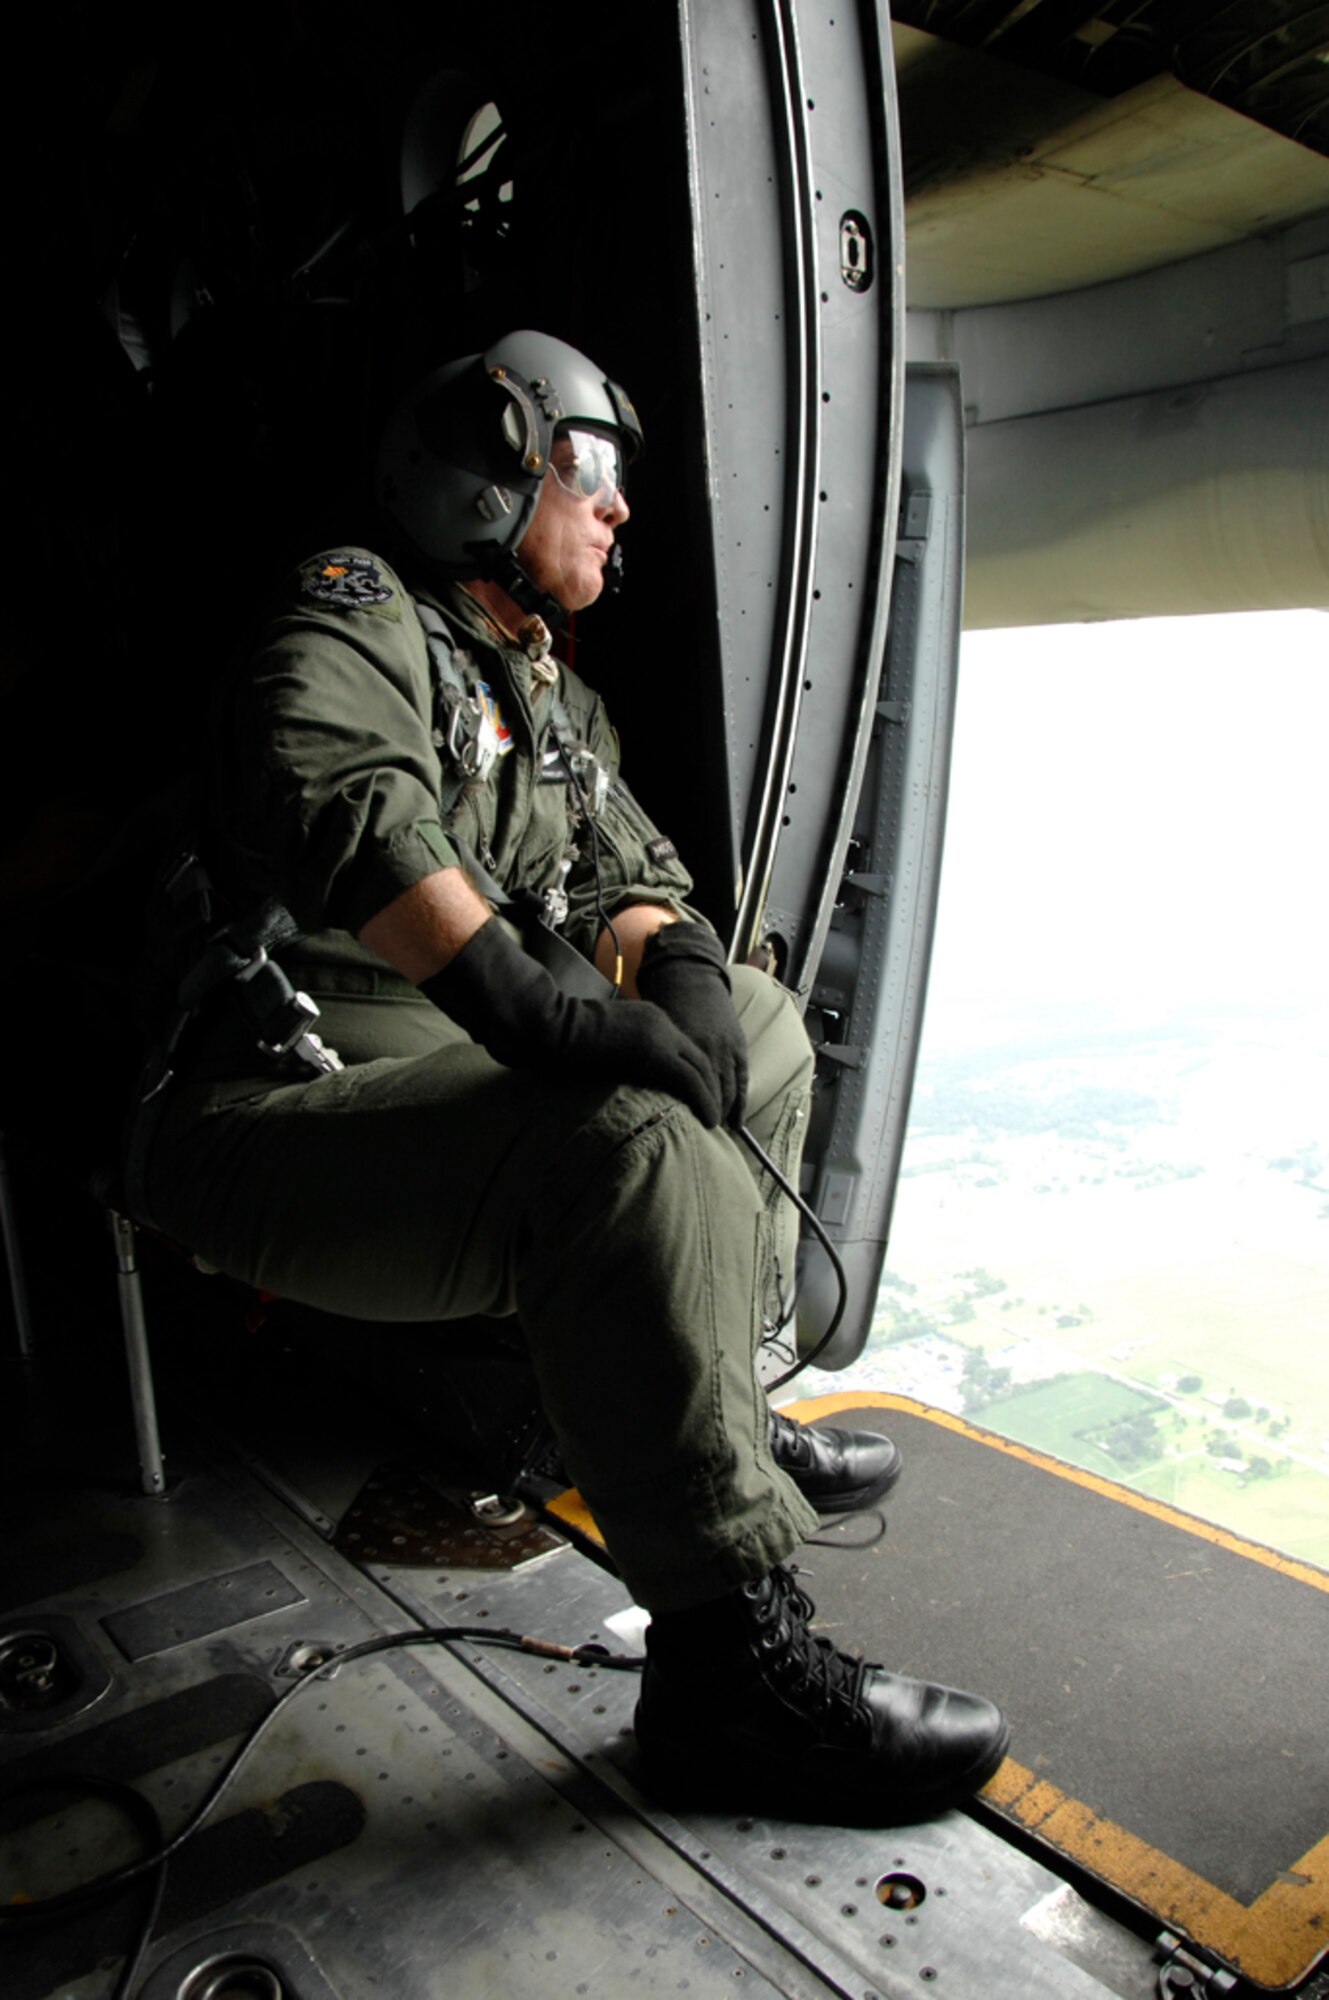 Chief Master Sgt. Ken Huntley, 129th Rescue Wing loadmaster, waits for the HH-60G Pave Hawk to link up with the MC-130P Combat Shadow during an aerial refueling over Louisiana.  More than 80 Airmen from the 129th RQW deployed to Ellington Field, Texas, as part of Joint Task Force 129, which supported Hurricane Gustav rescue operations. Air National Guardsmen from the 106th Rescue Wing, Gabreski Airport, N.Y., and 176th Wing, Kulis Air National Guard Base, Alaska, were also part of the rescue task force. (U.S. Air Force photo by Tech. Sgt. Ray Aquino)